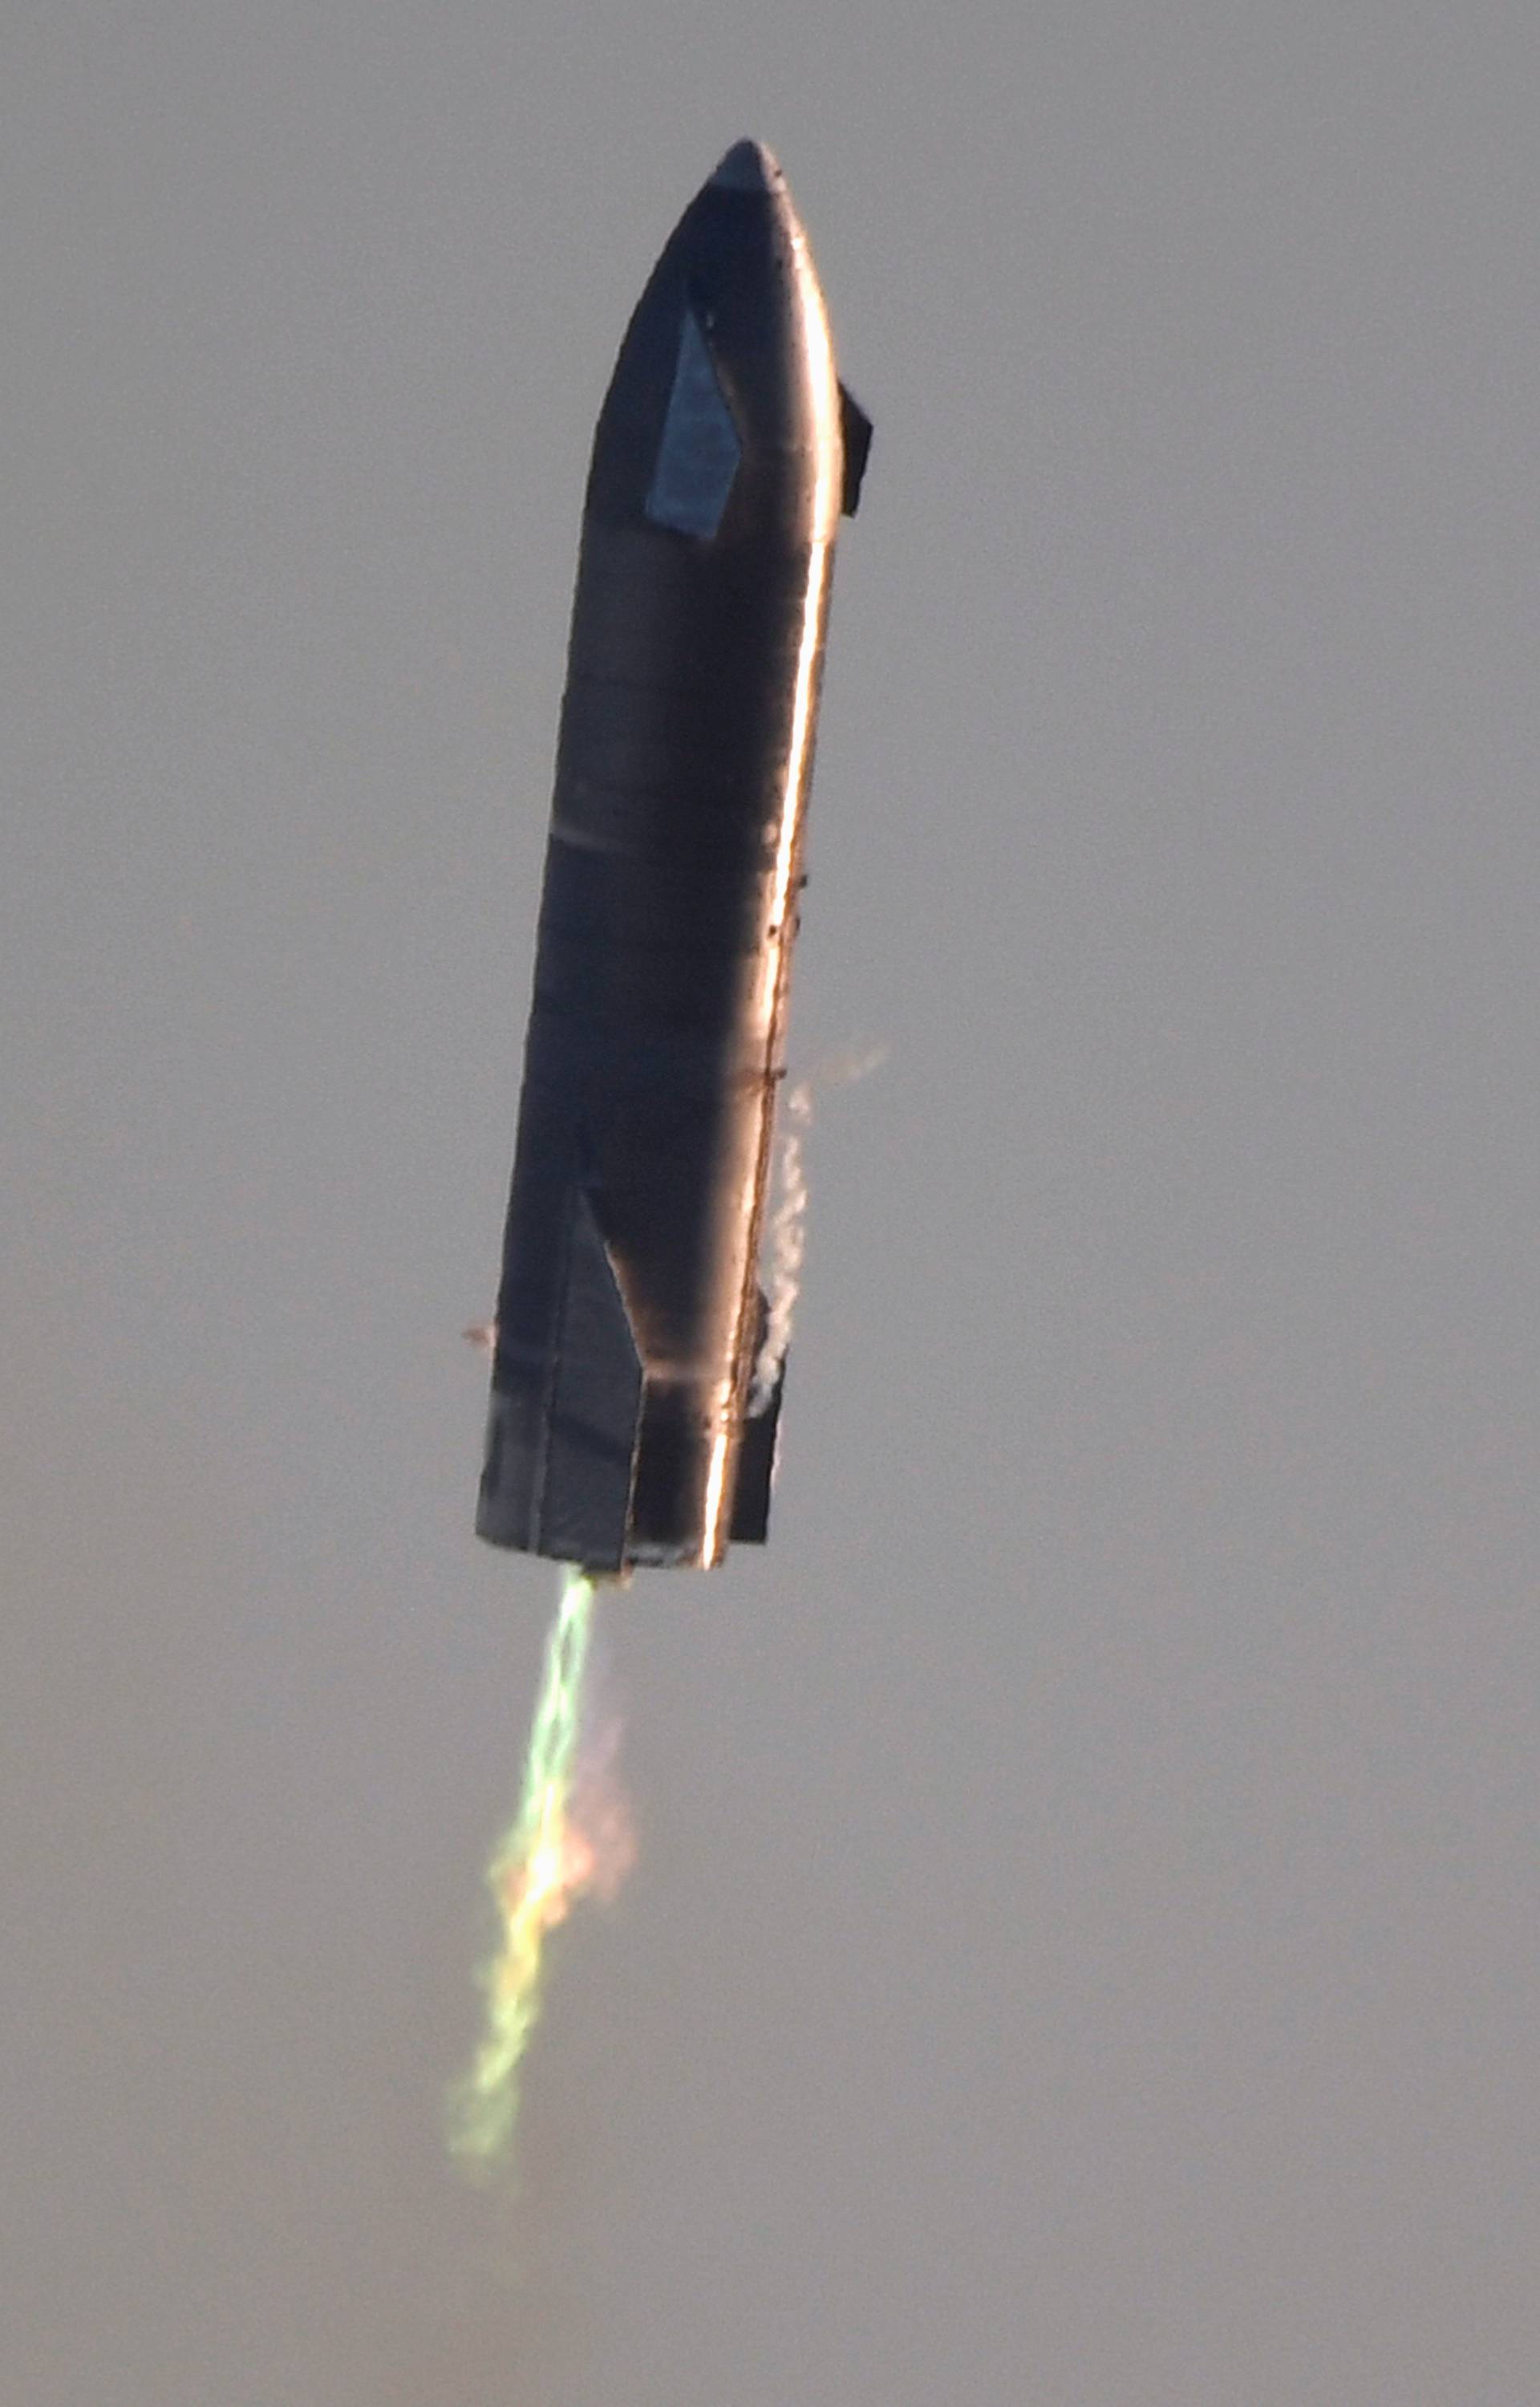 Test flight of SpaceX's first super heavy-lift Starship SN8 rocket after it launched from their facility in Boca Chica,Texas